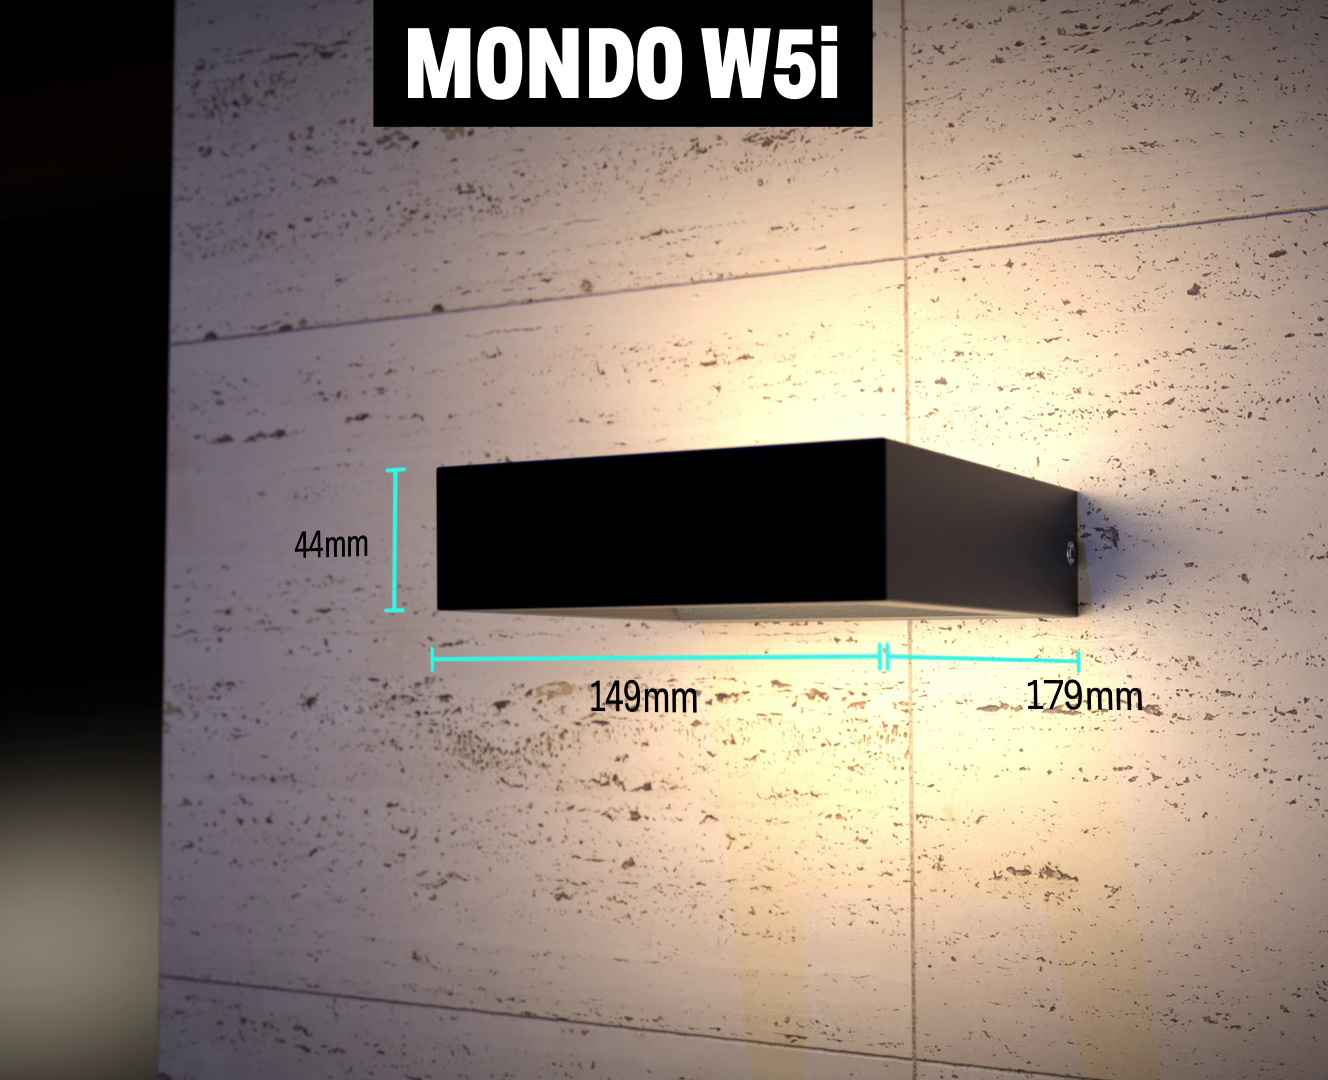 3D product visualisation images of MONDO W5i, with dimensions indicated